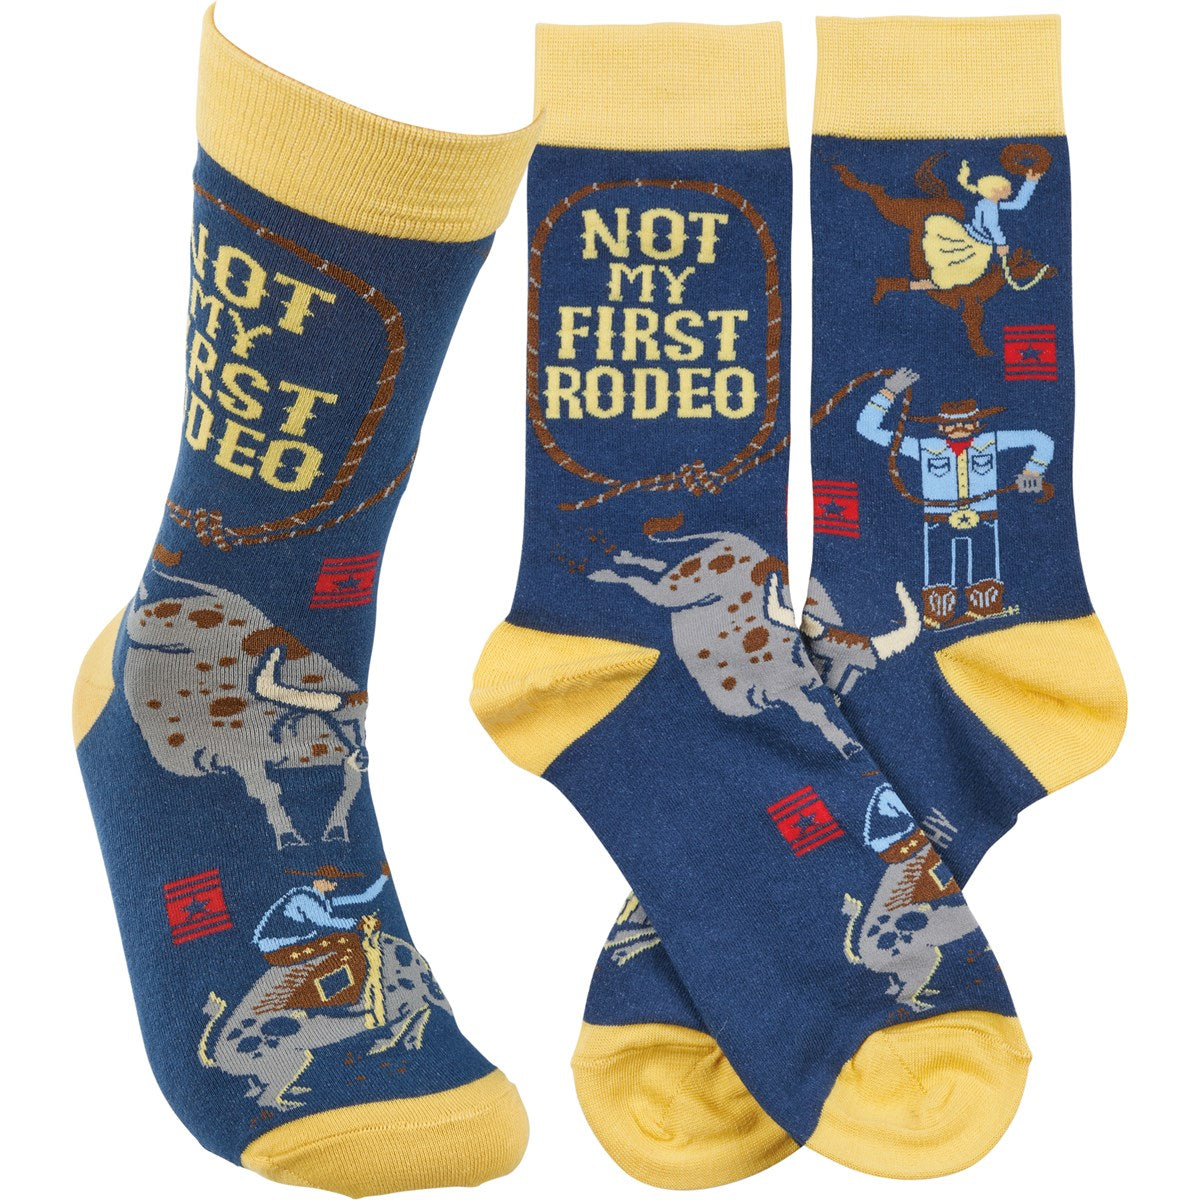 Socks: Not My First Rodeo Woven Crew